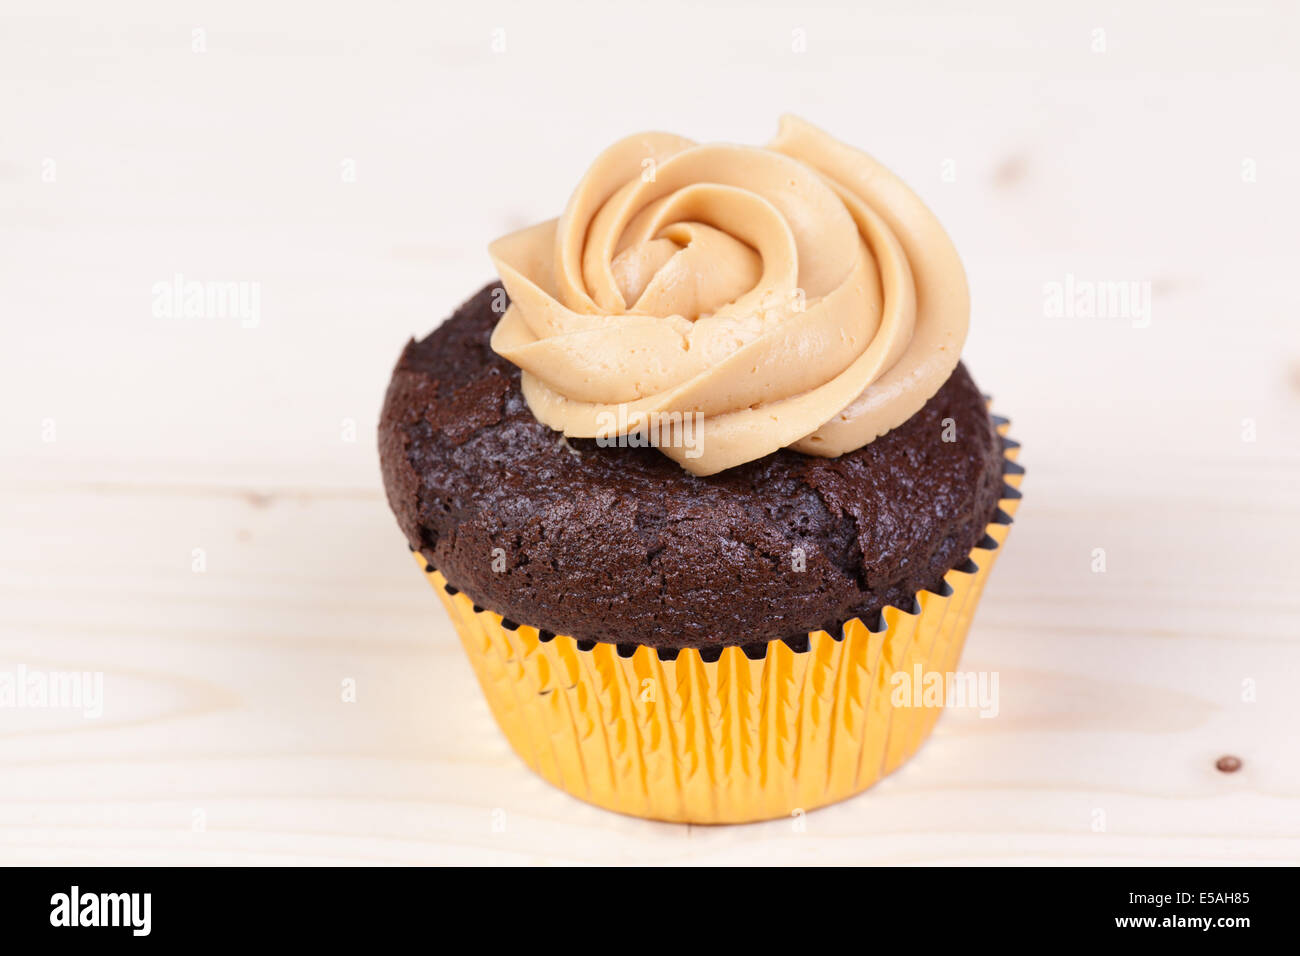 chocolate cupcakes with chocolate frosting Stock Photo